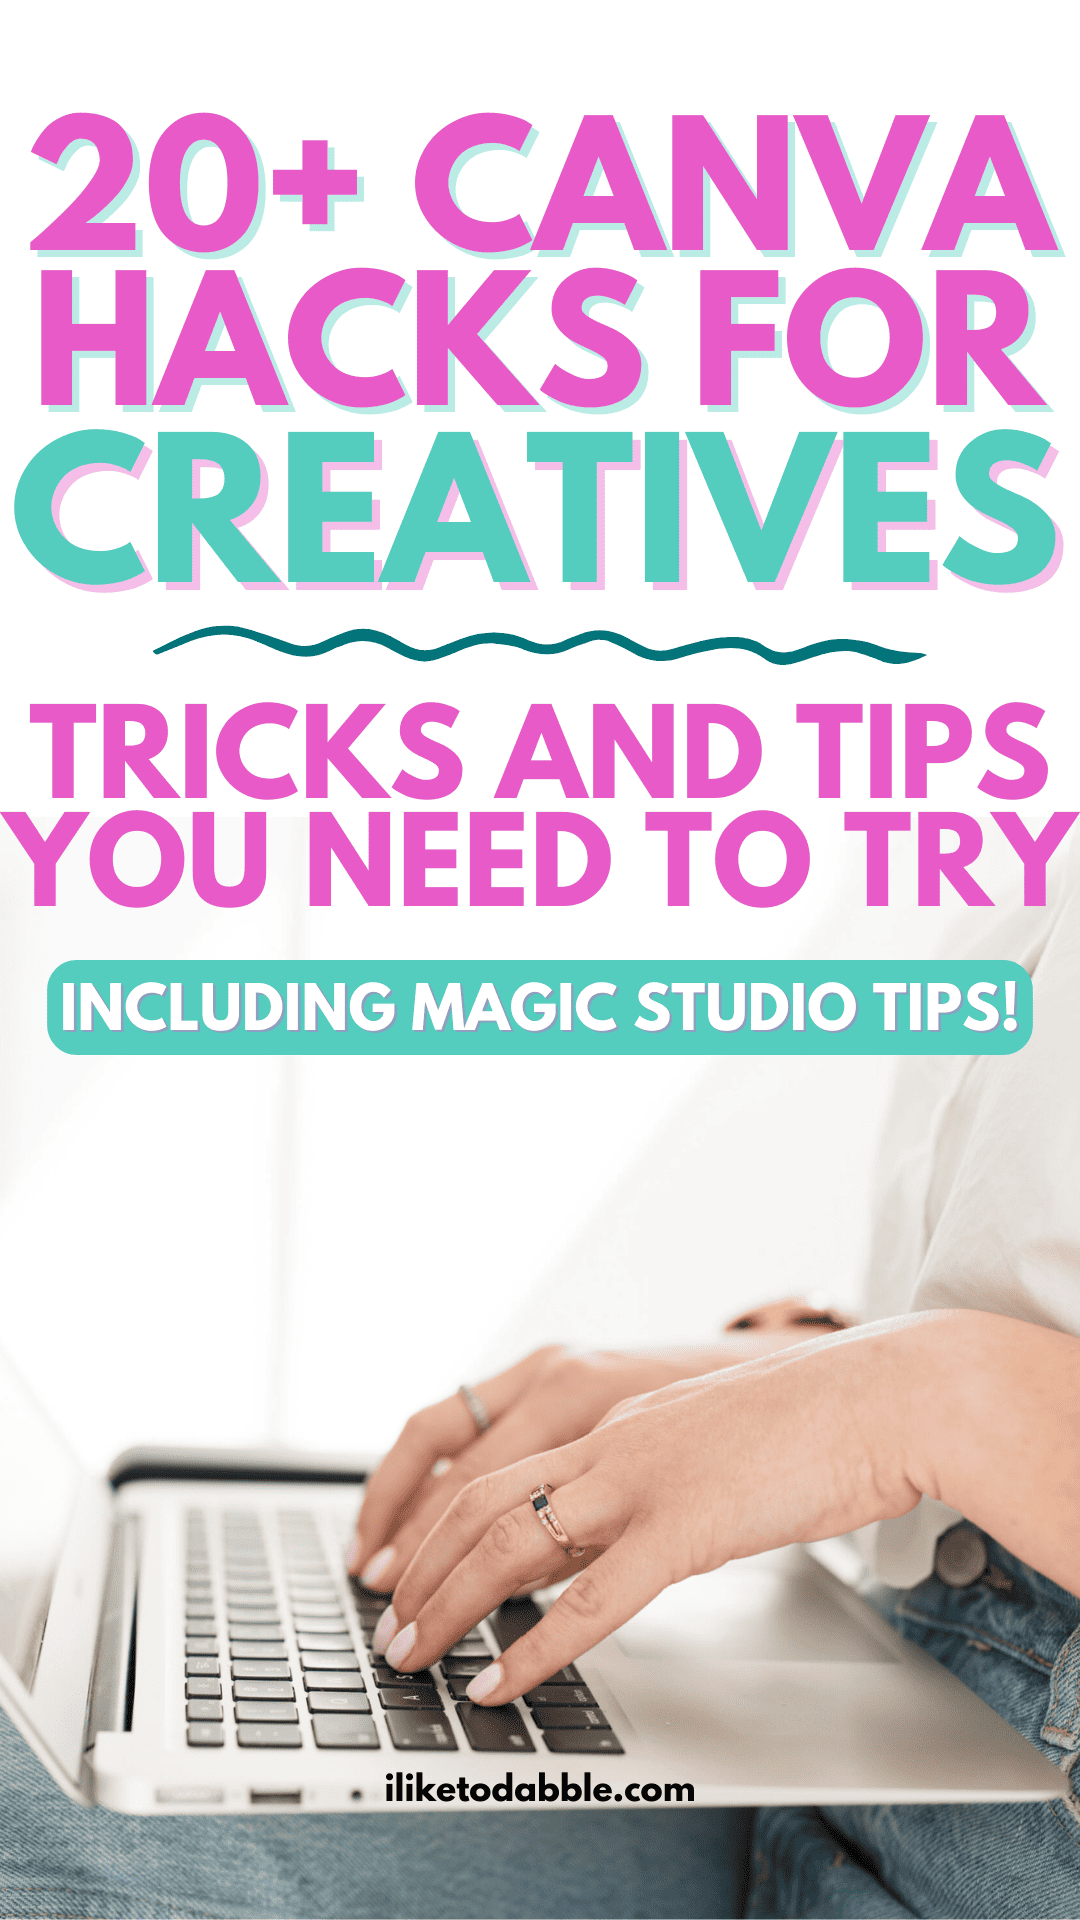 Someone typing on a laptop keyboard with a white background. The text above says "20+ Canva Hacks for Creatives: Tricks and Tips You Need To Try (Including Magic Studio Tips!"